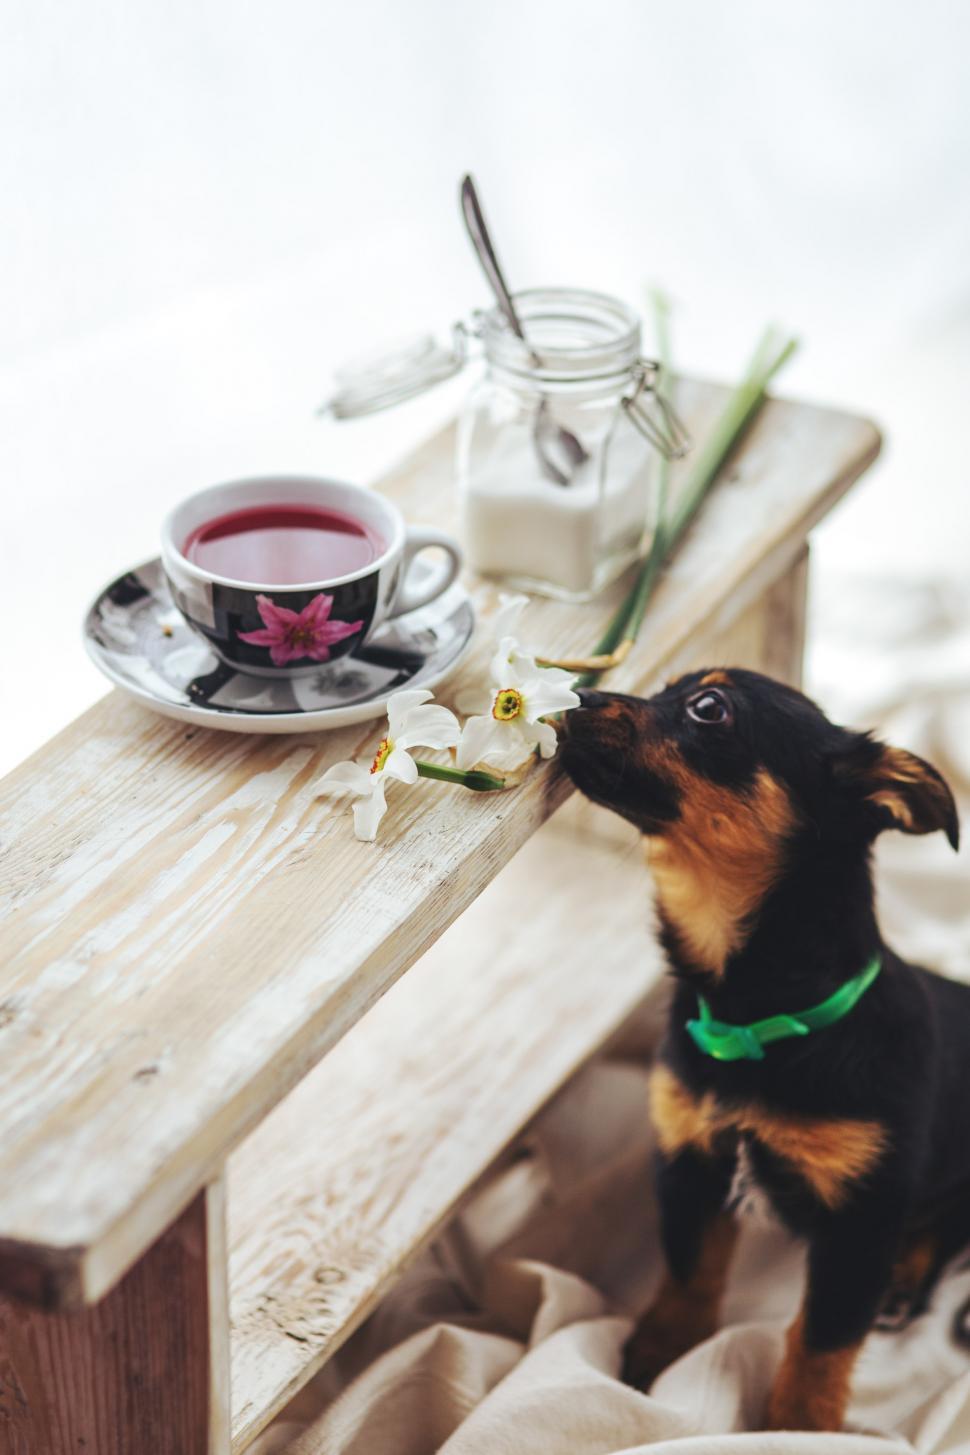 Free Image of Small Black and Brown Dog Sitting on Wooden Bench Next to Cup 